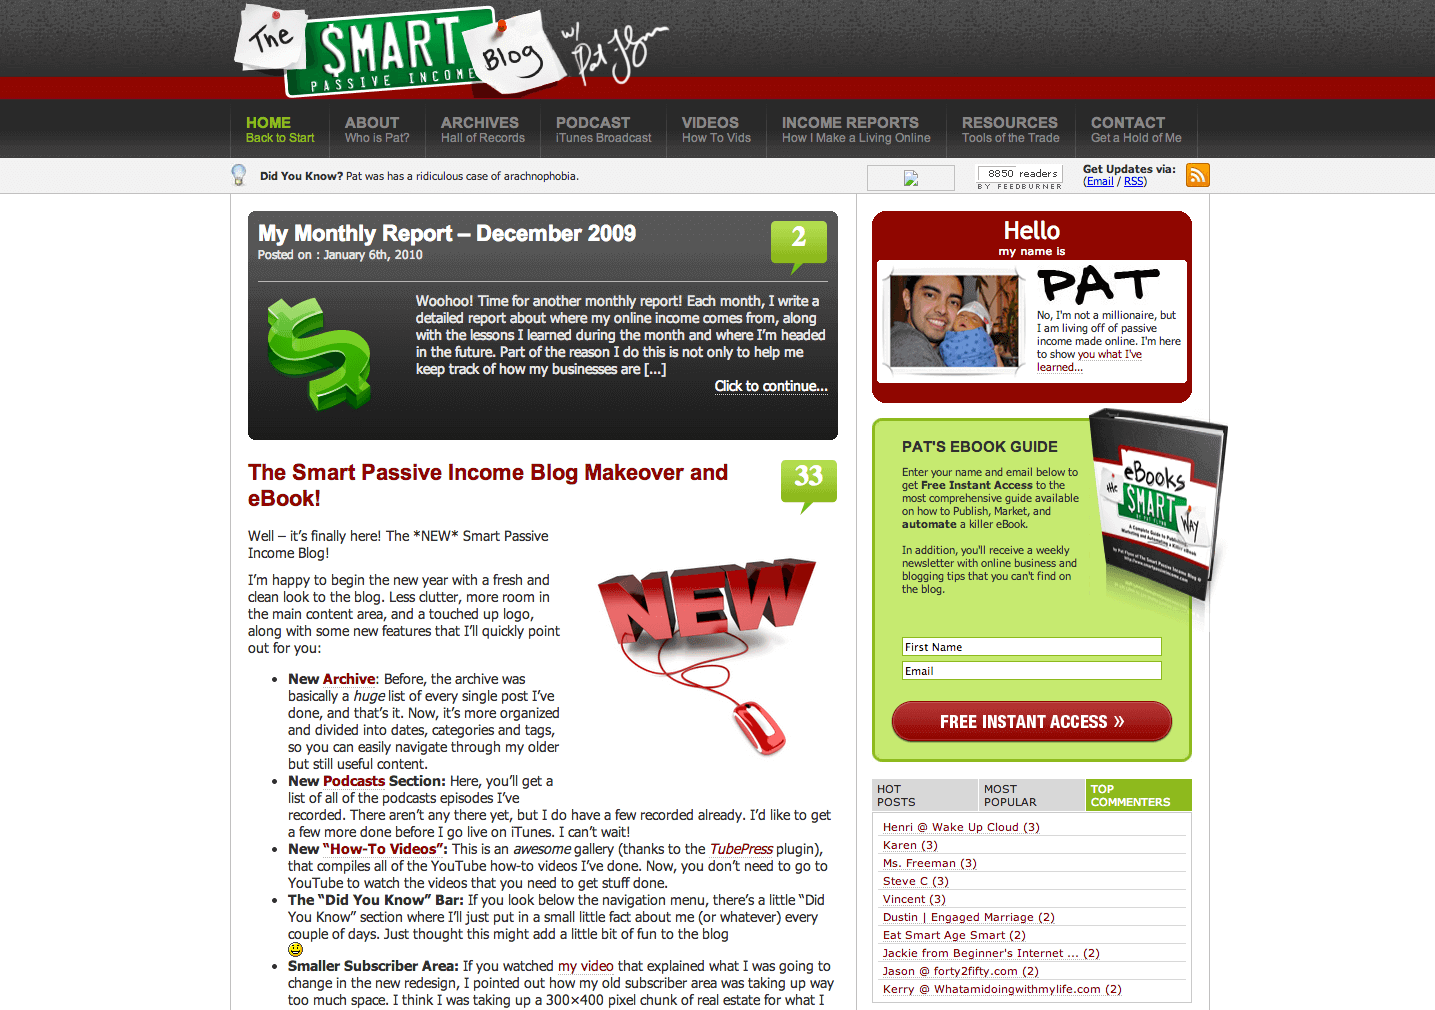 Back to the red, green, and gray theme. The banner reads "The Smart Passive Income Blog with Pat Flynn." The menu stretches along the bottom of the banner. The main content area has the featured post with a gray background, and one other post below with a white background. The right-hand sidebar has the red "Hello my name is Pat" sticker. Pat is holding a baby in the picture. Below that is a CTA for a lead magnet, eBooks the Smart Way. Then there is a section below with tabs to display Hot Posts, Most Popular, and Top Commenters.